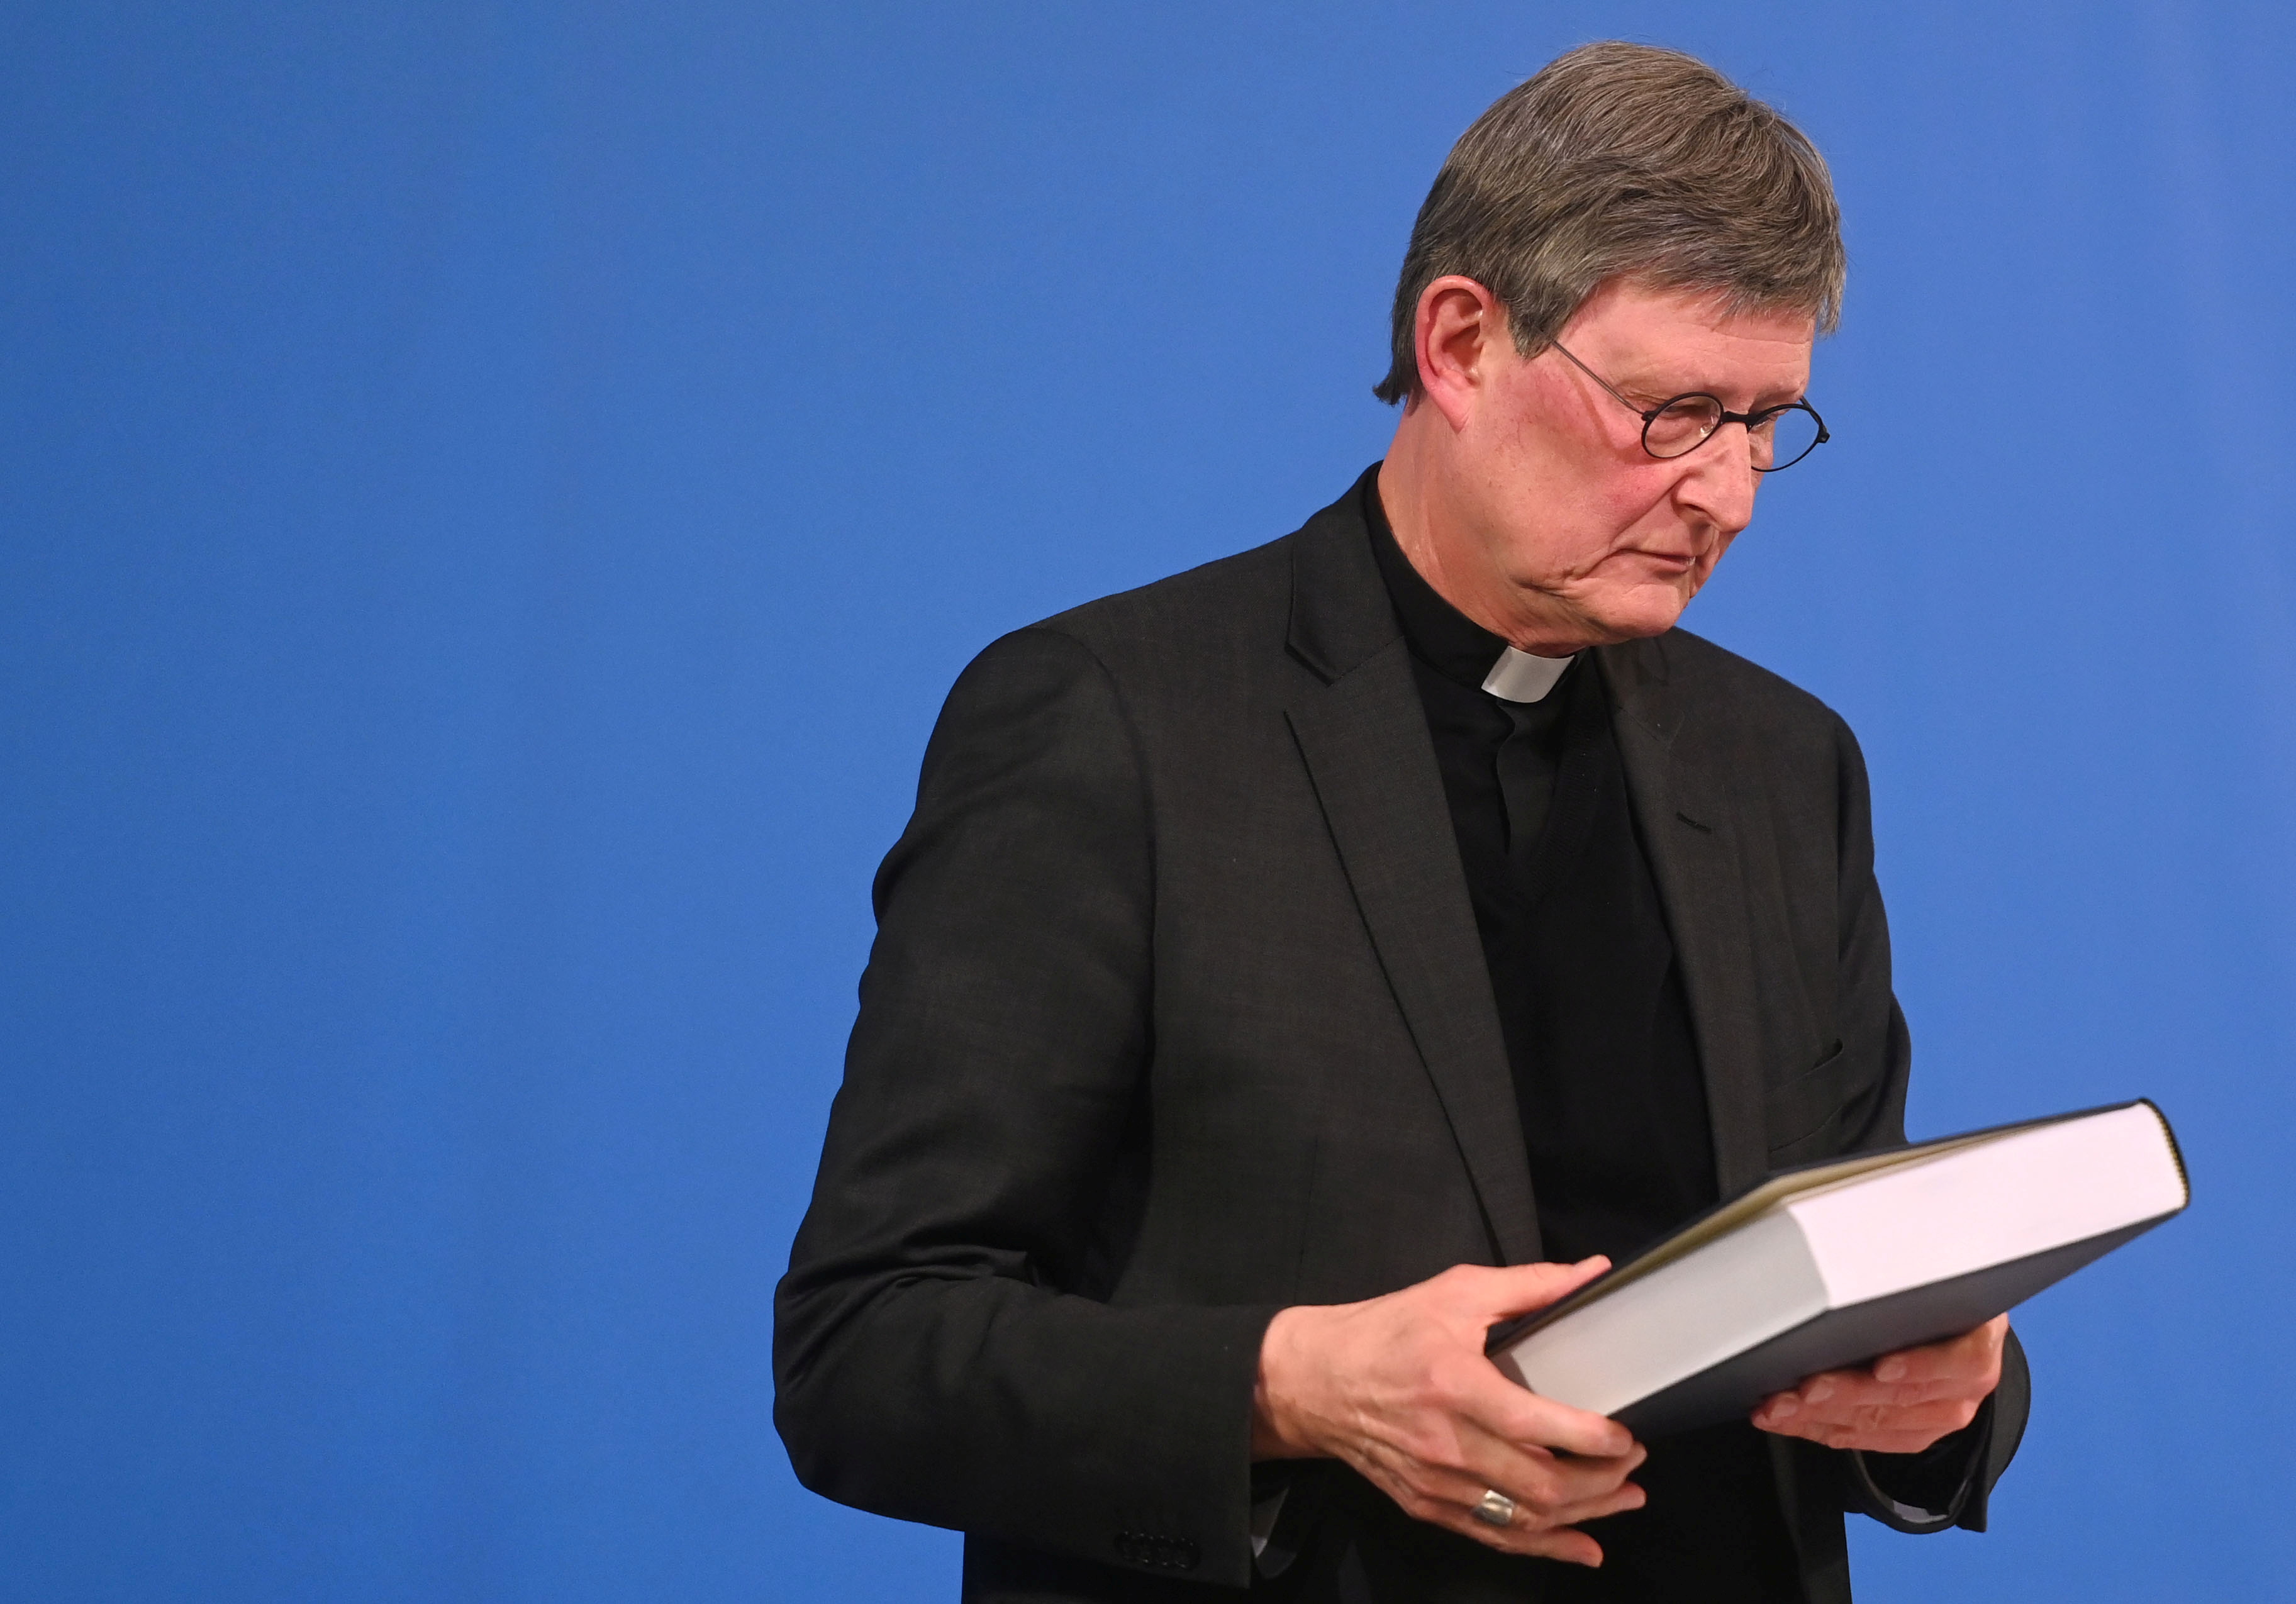 Report on abuse cases in Cologne archdiocese